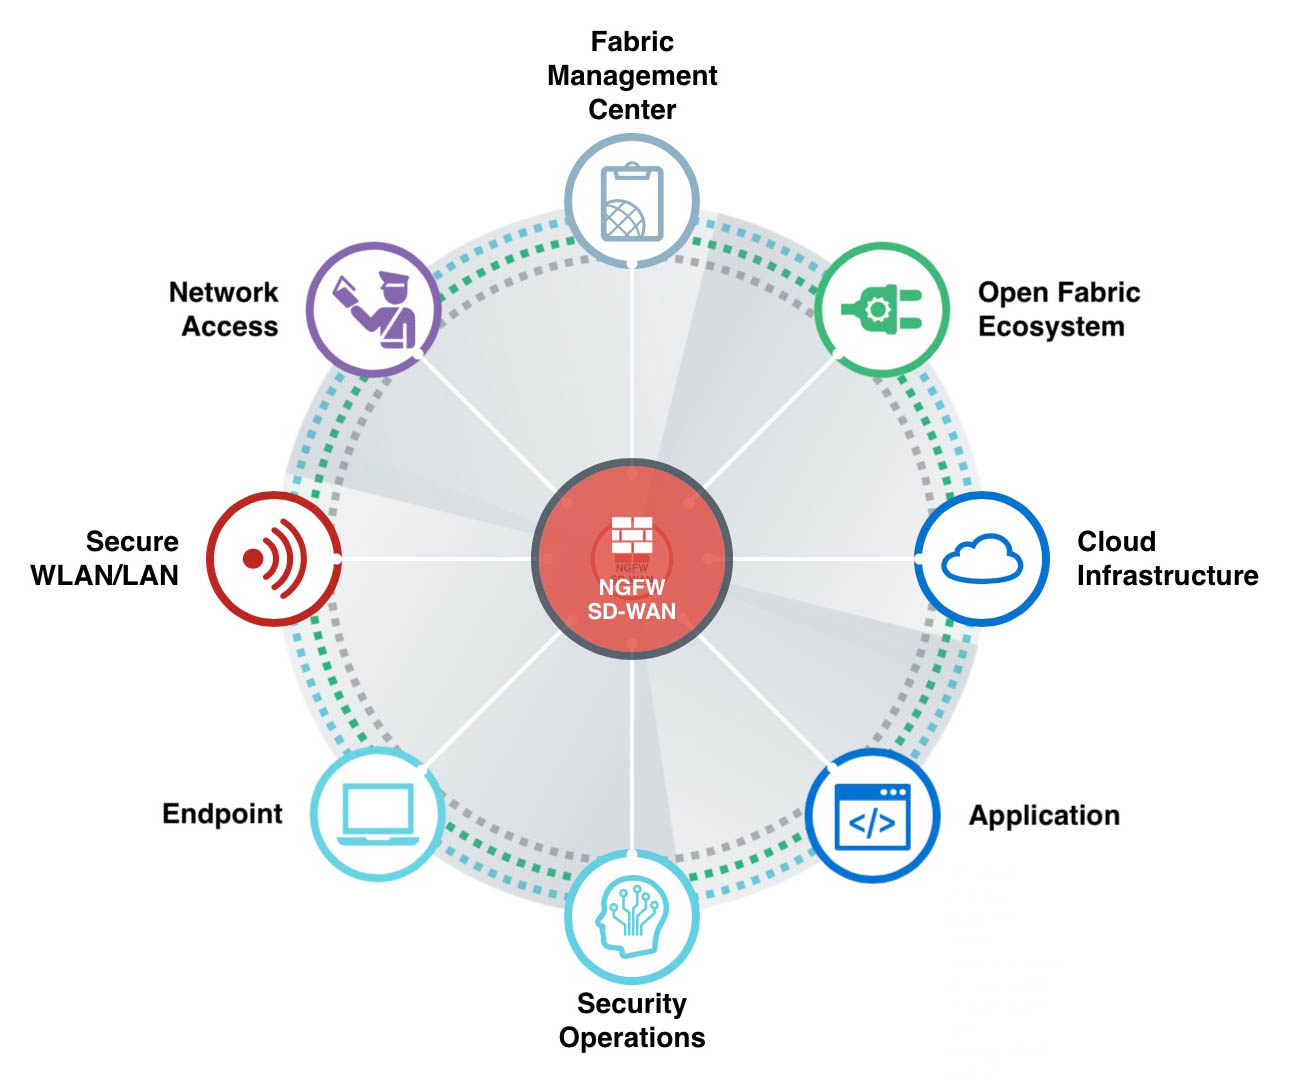 Fortinet acquires cloud security and networking innovator OPAQ networks